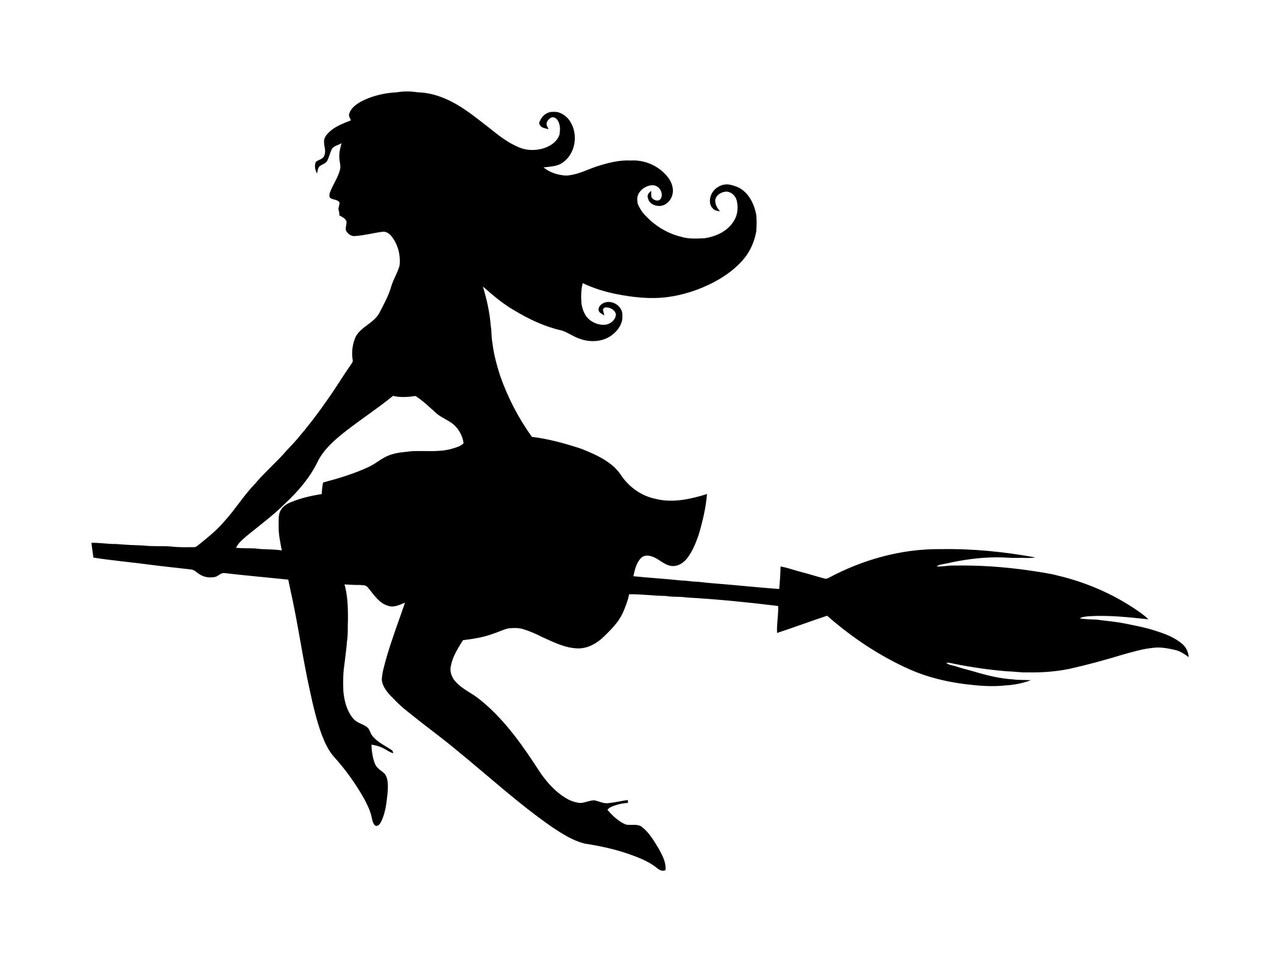 Witch on Broomstick Vinyl Decal Sticker -V8- Flying Halloween Sexy Witchcraft